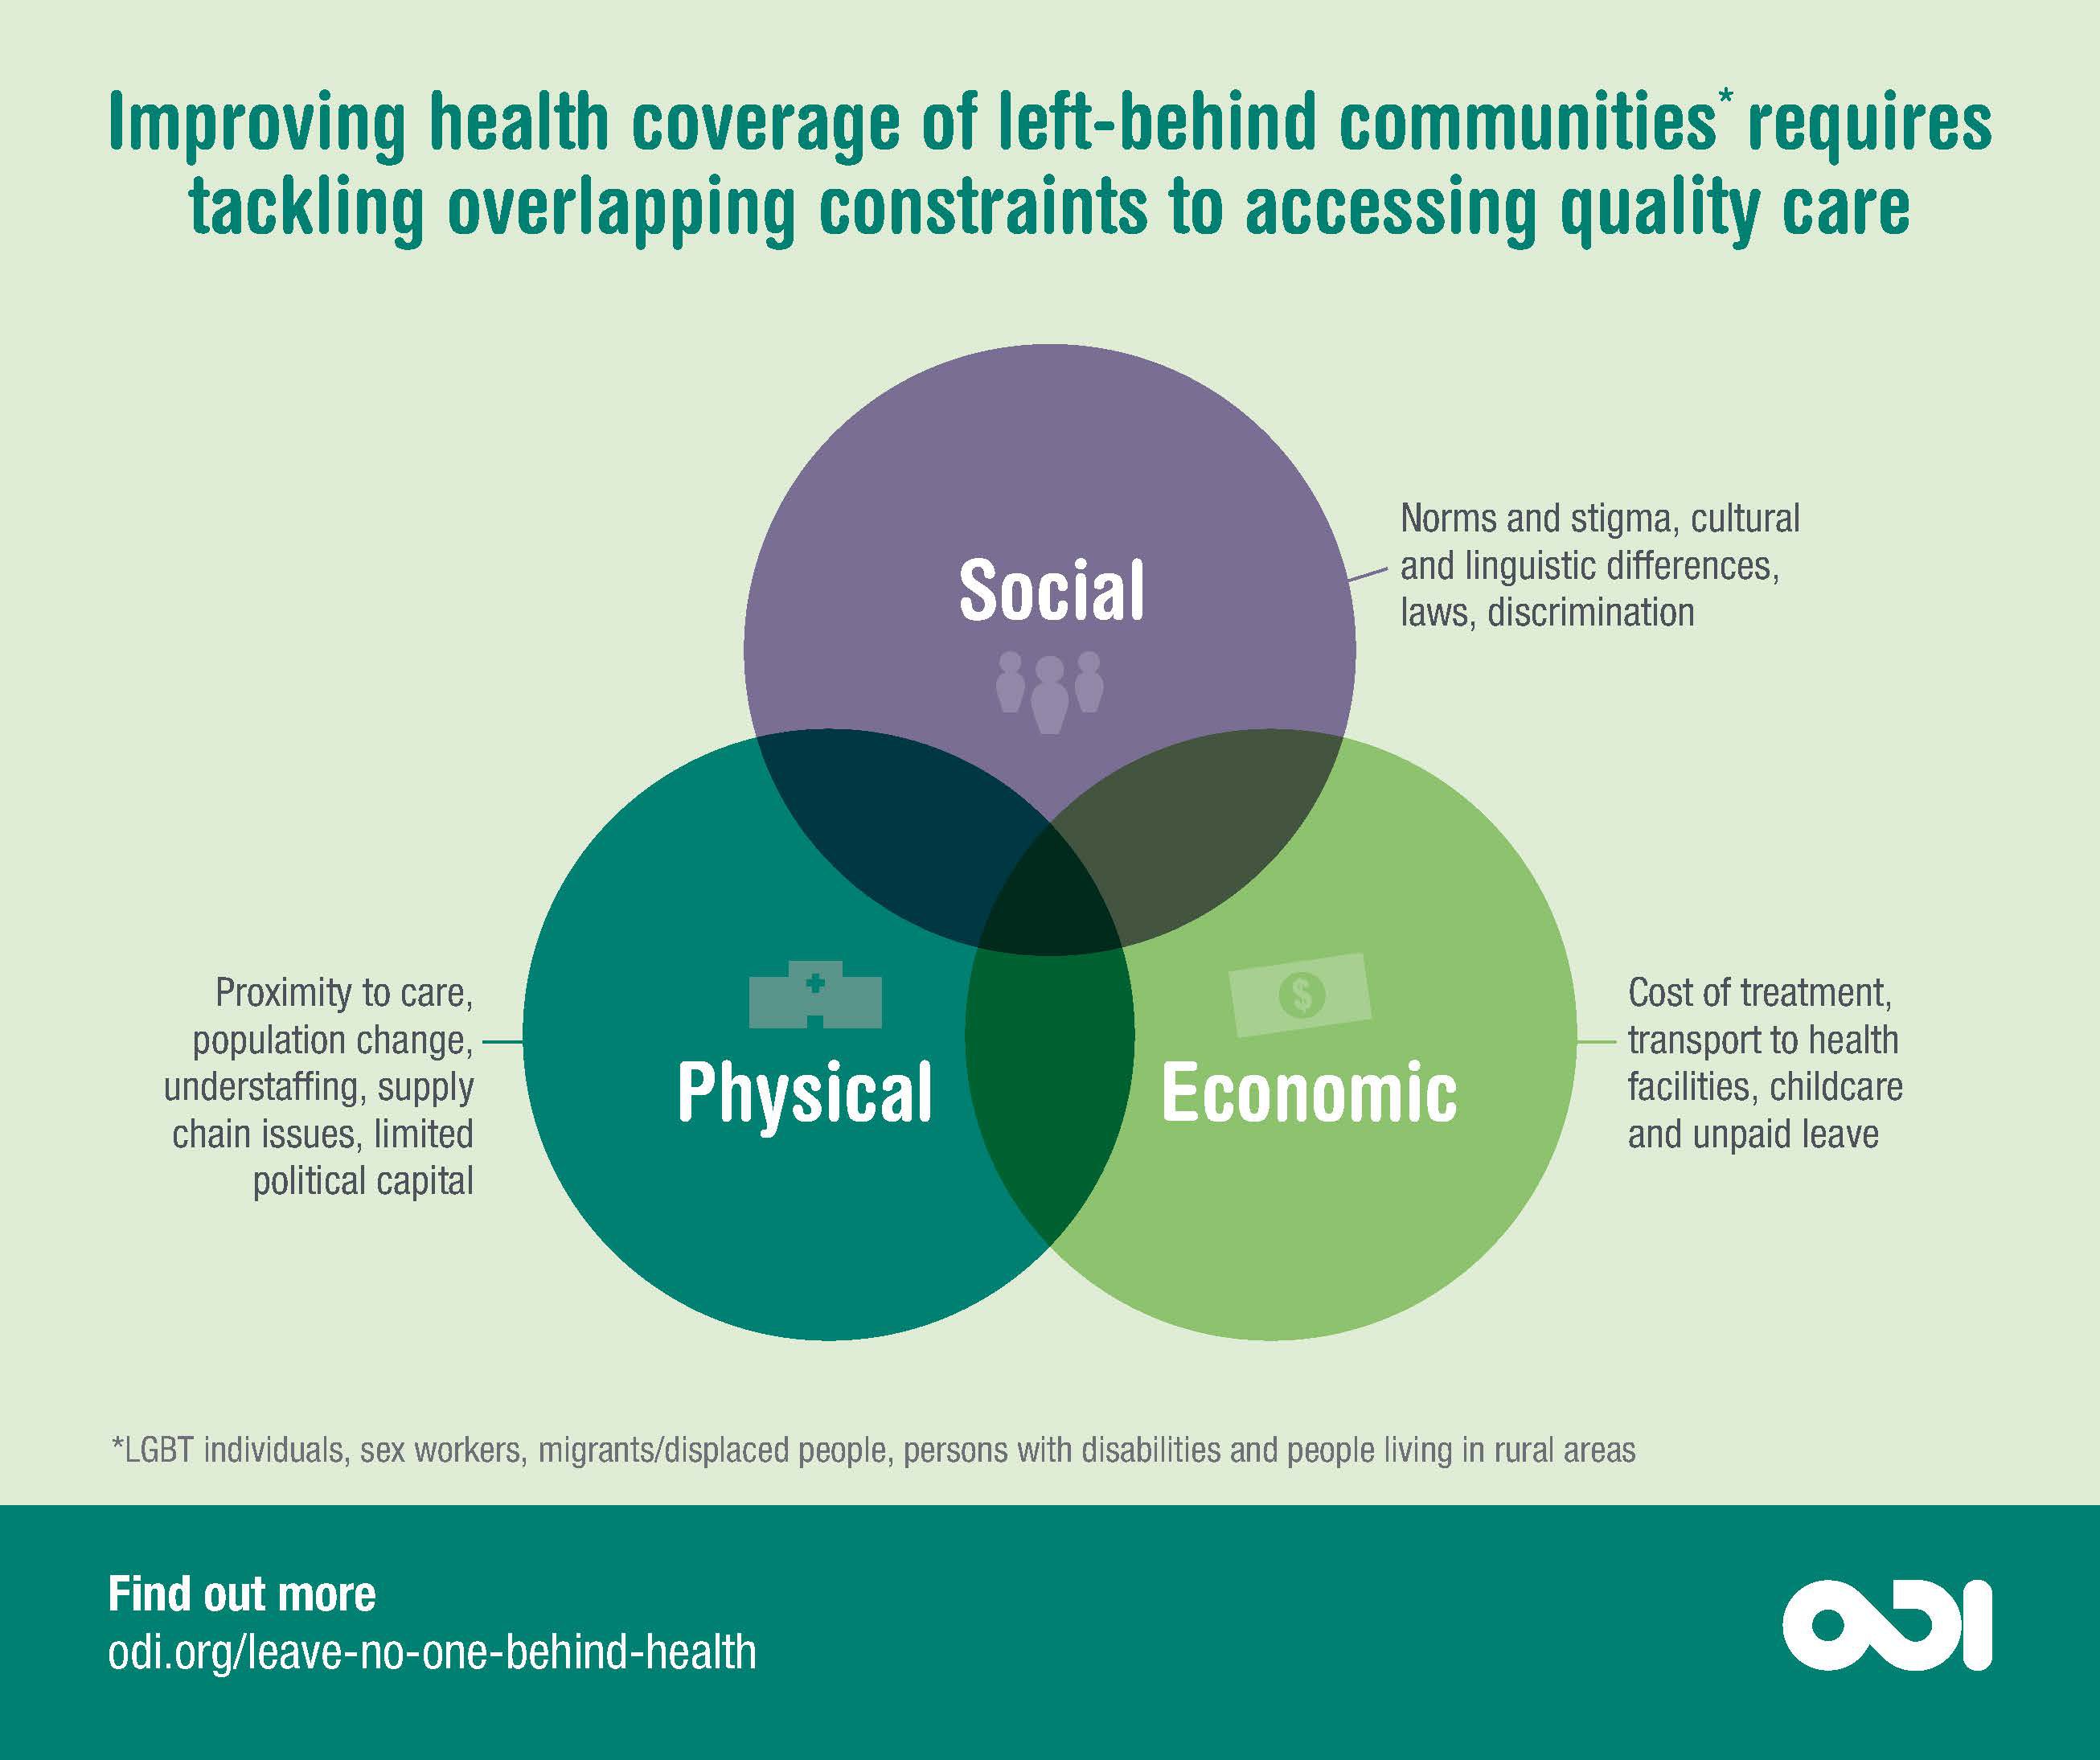 Improving health coverage of left-behind communities requires tackling overlapping constraints to accessing quality care